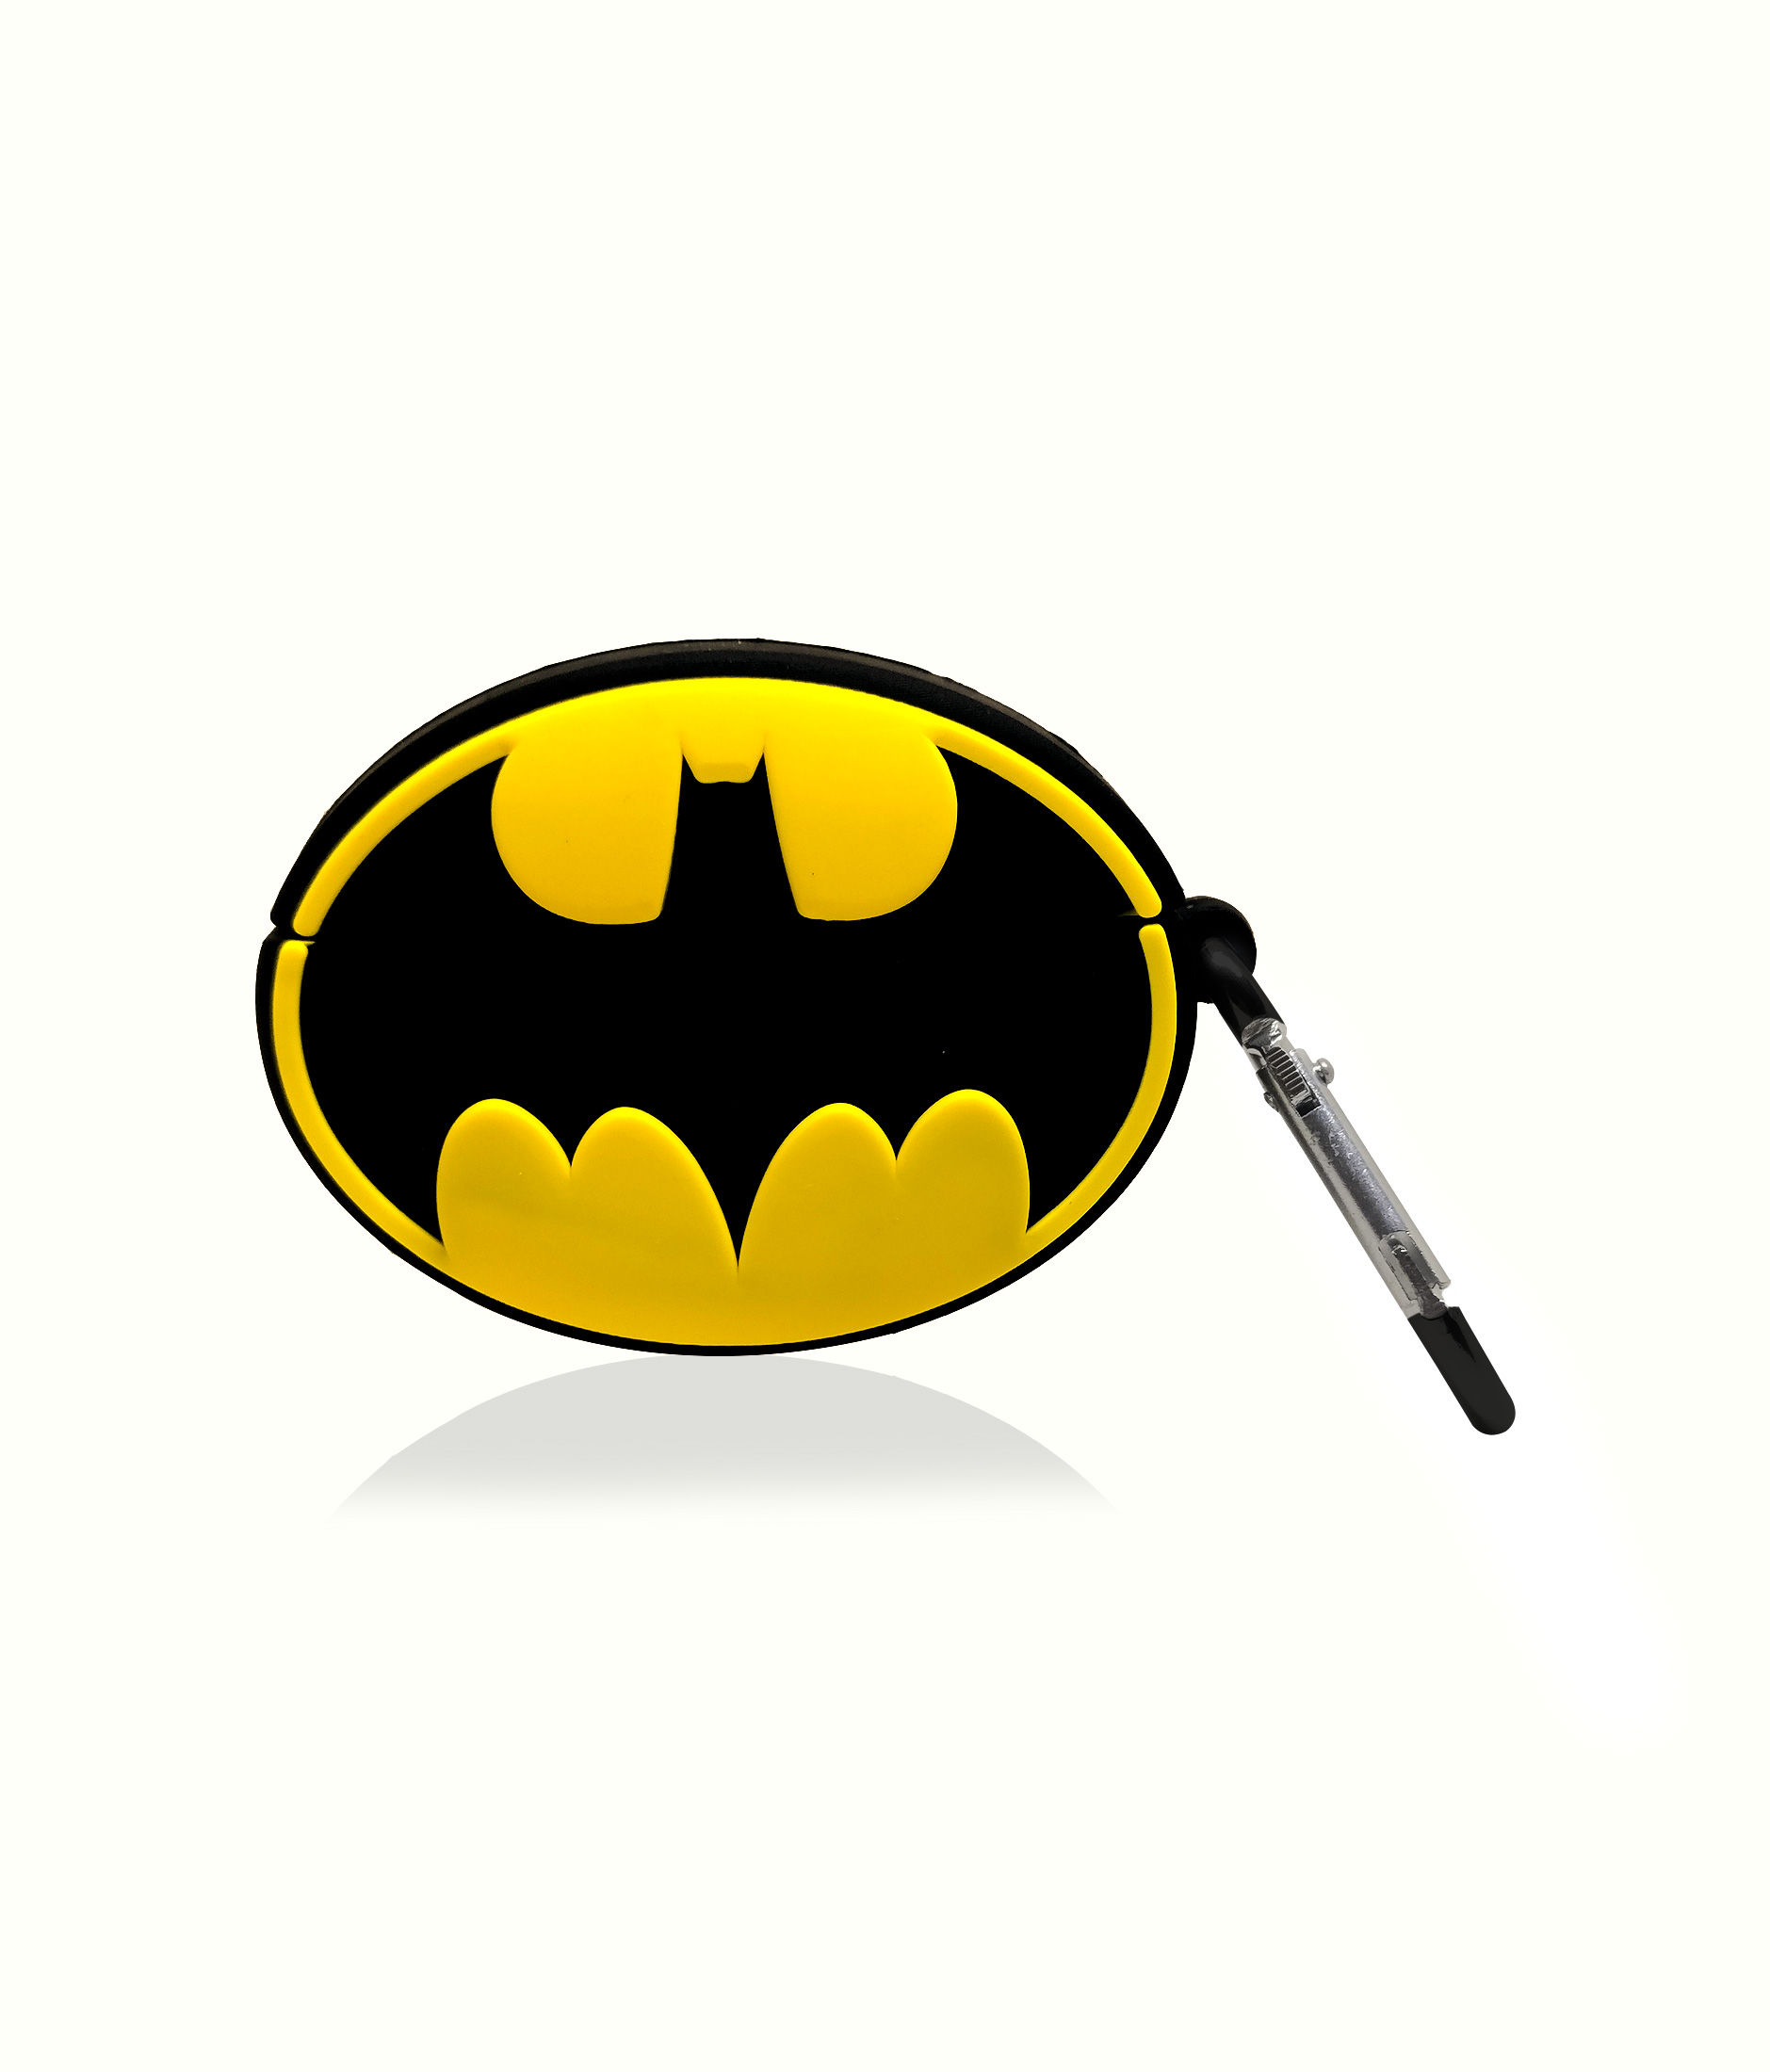 Buy Bat Signal - AirPods Pro Case Airpod Cases Online